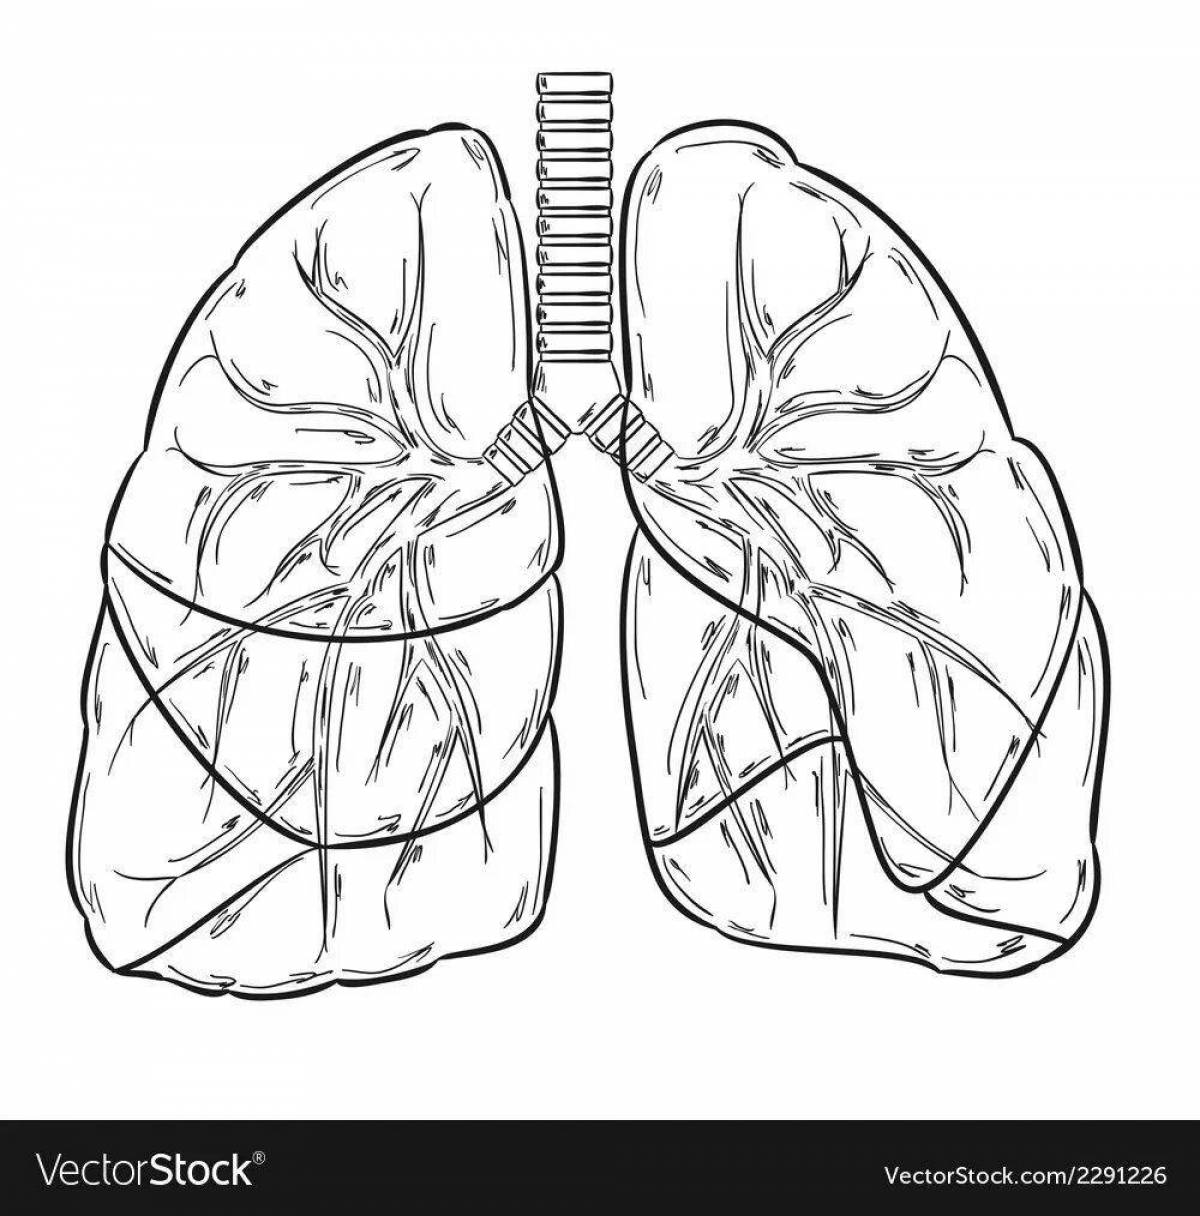 Fun coloring of human lungs for children